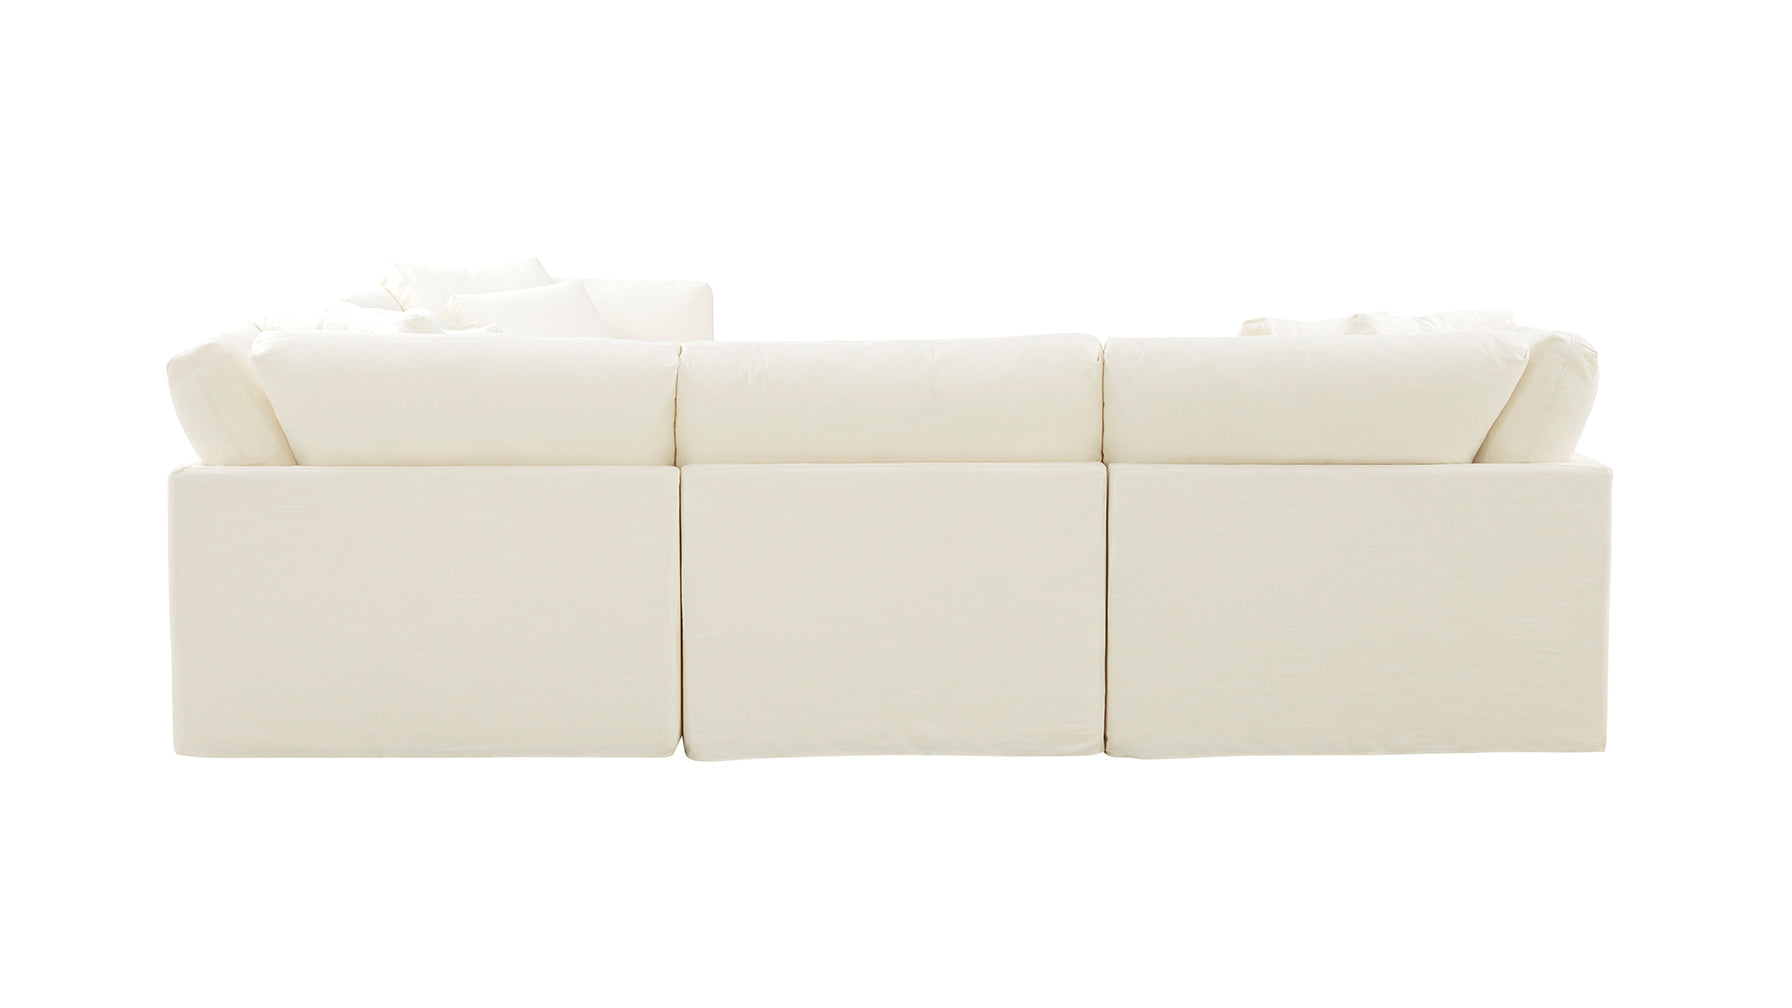 Get Together™ 5-Piece Modular Sectional Closed, Large, Cream Linen - Image 9